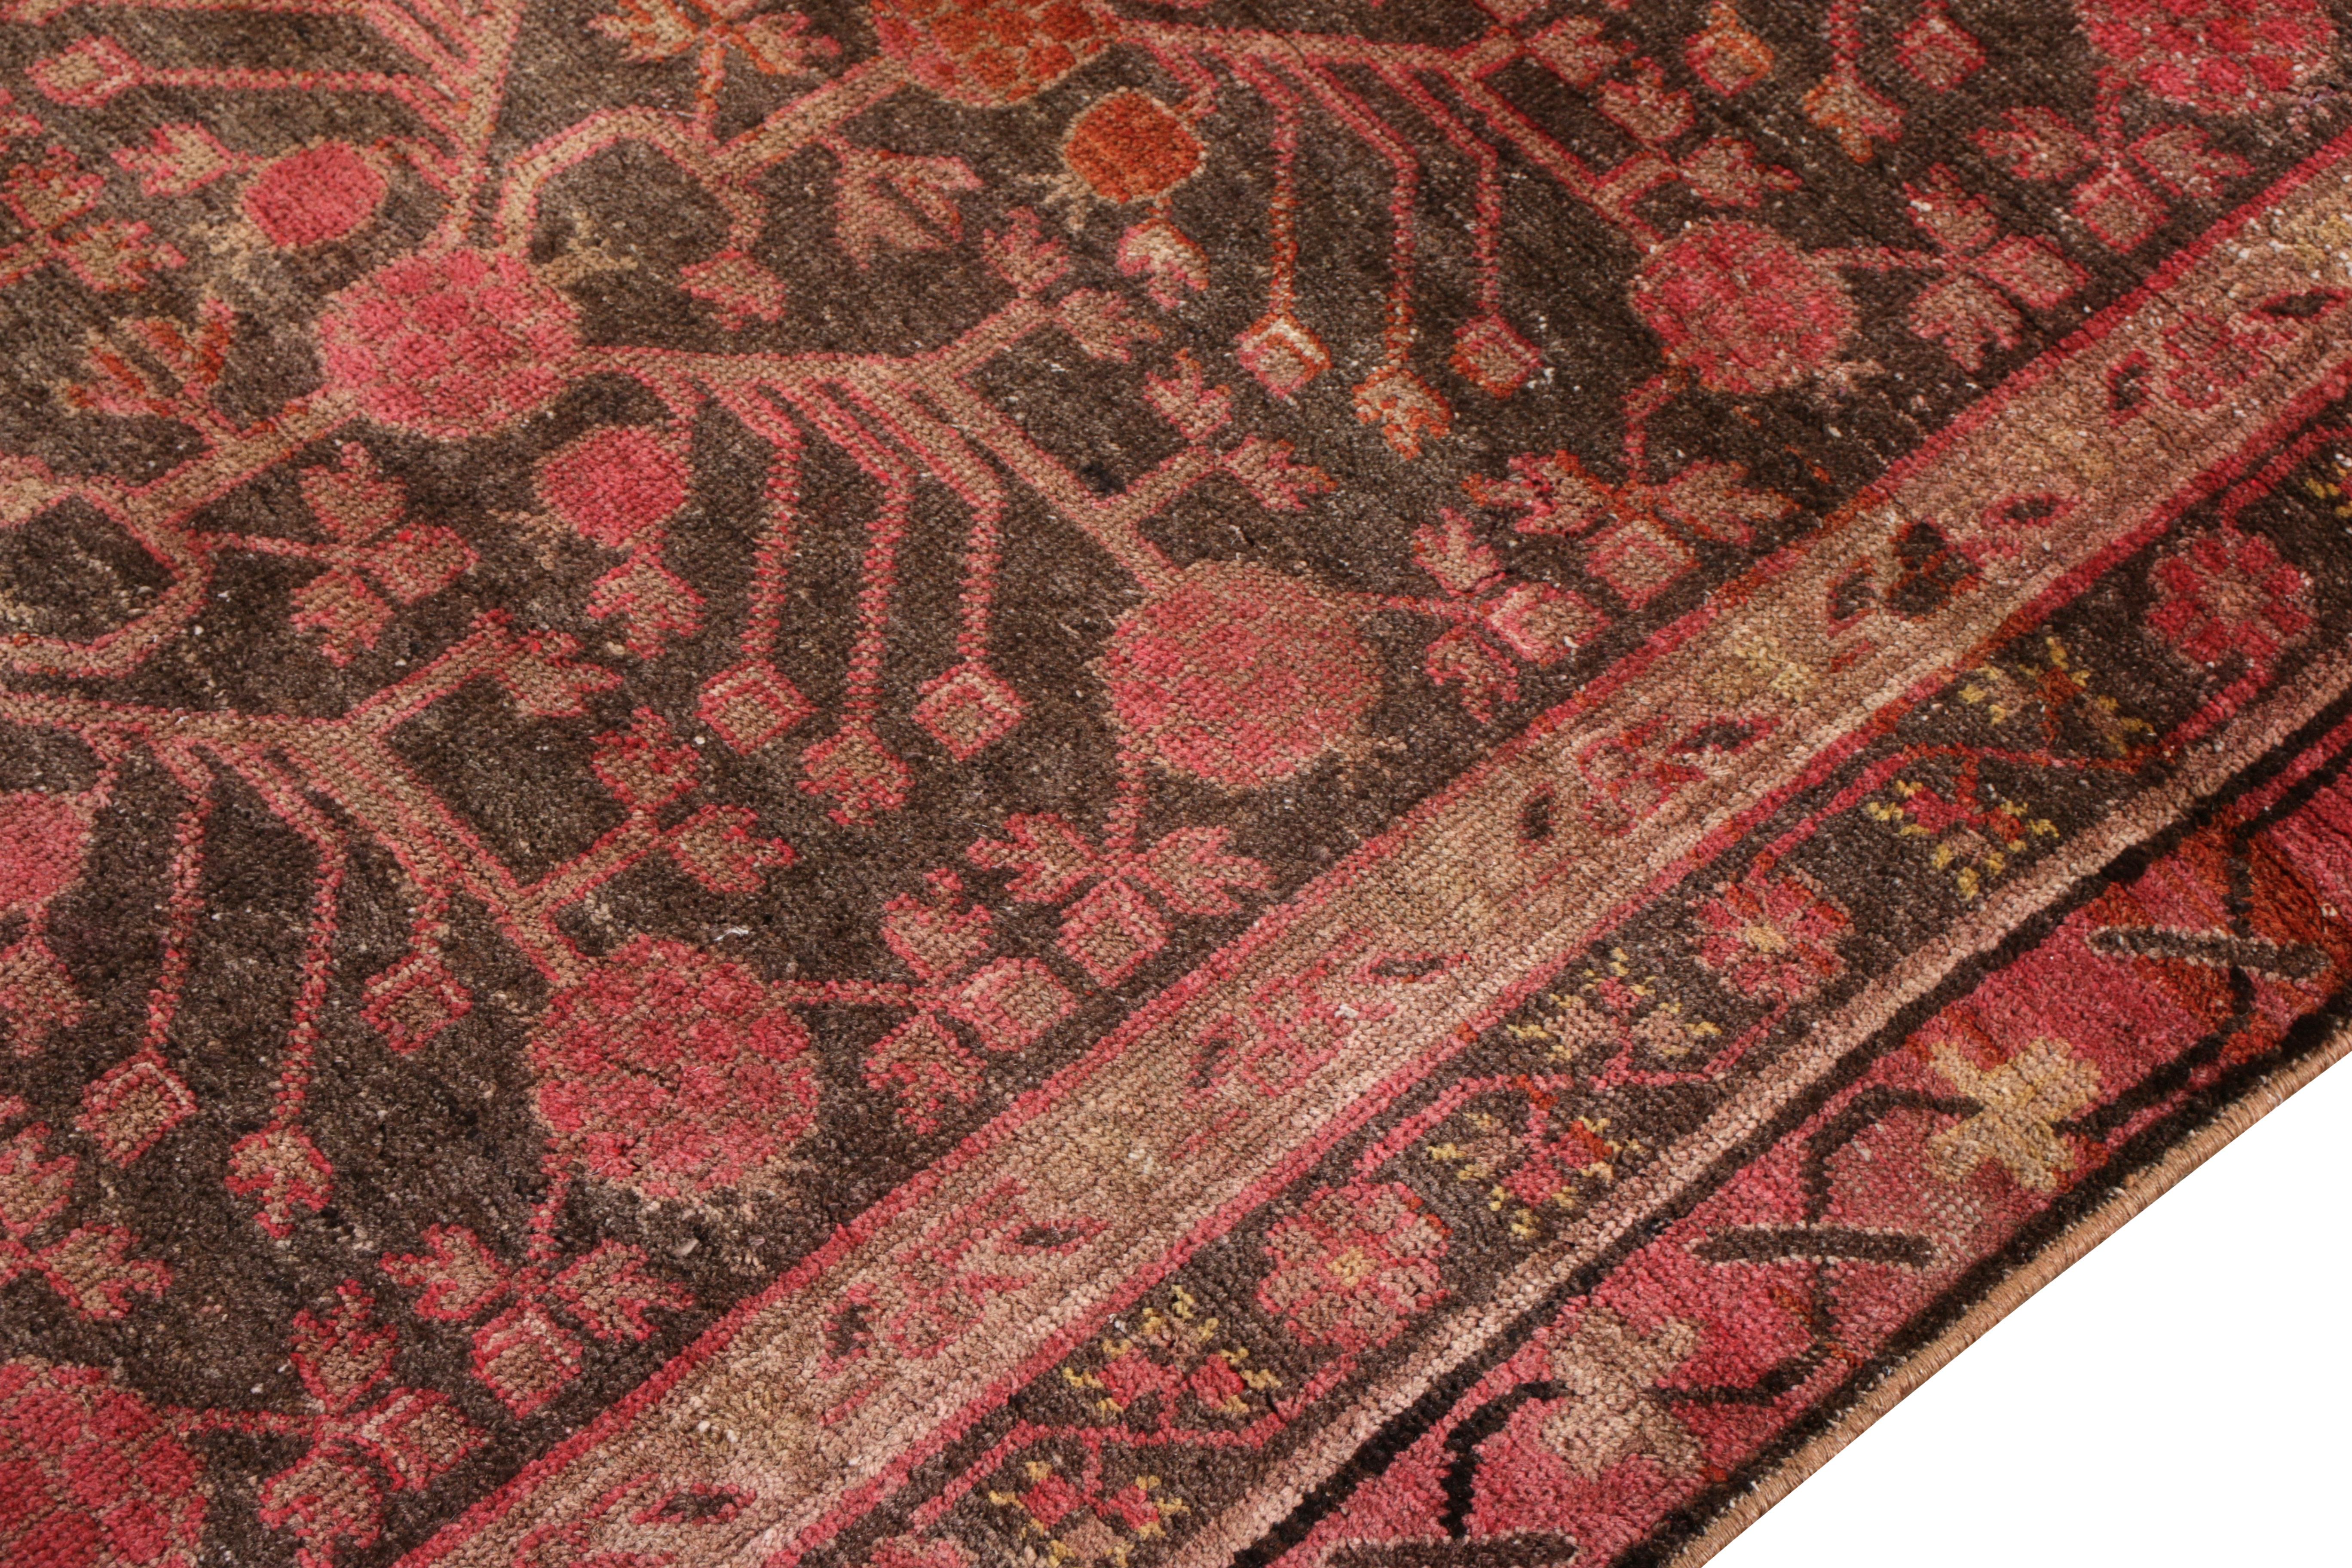 Early 20th Century Hand-Knotted Antique Khotan Rug in Brown Pomegranate Pattern by Rug & Kilim